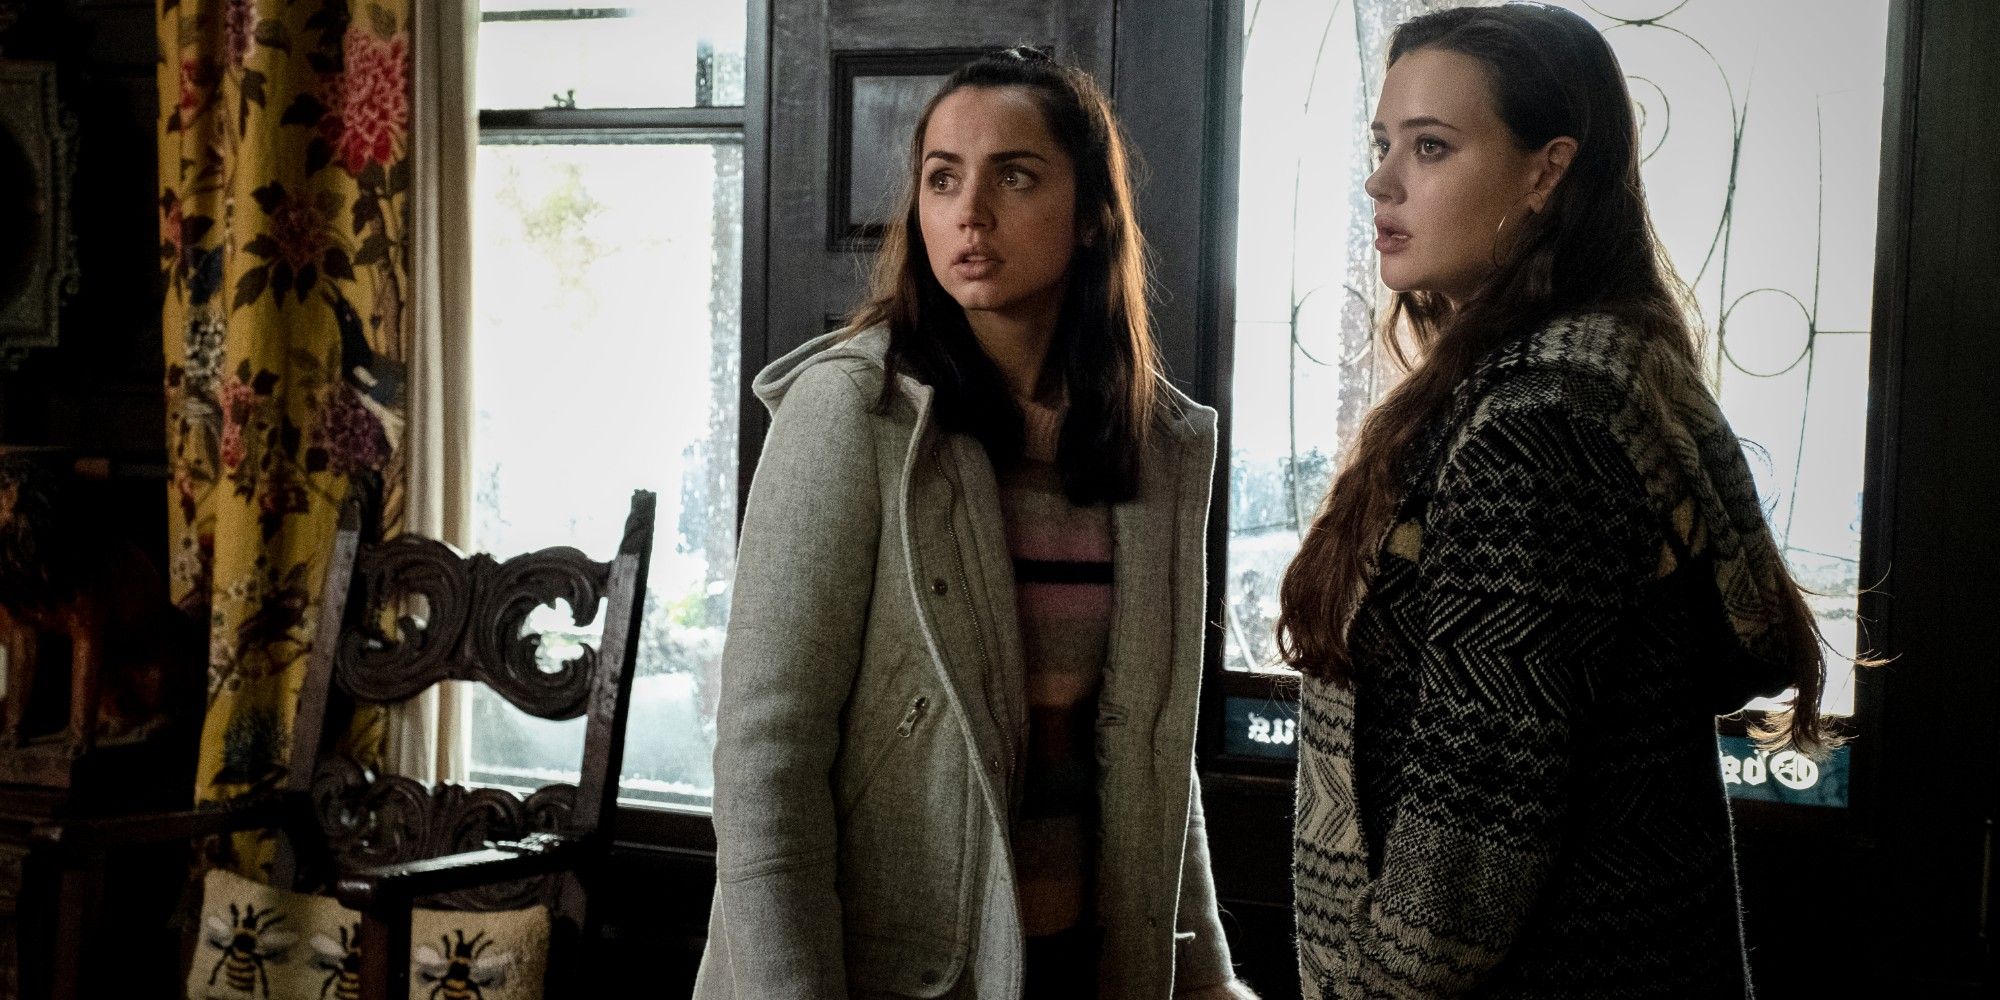 Ana de Armas and Katherine Langford in Knives Out